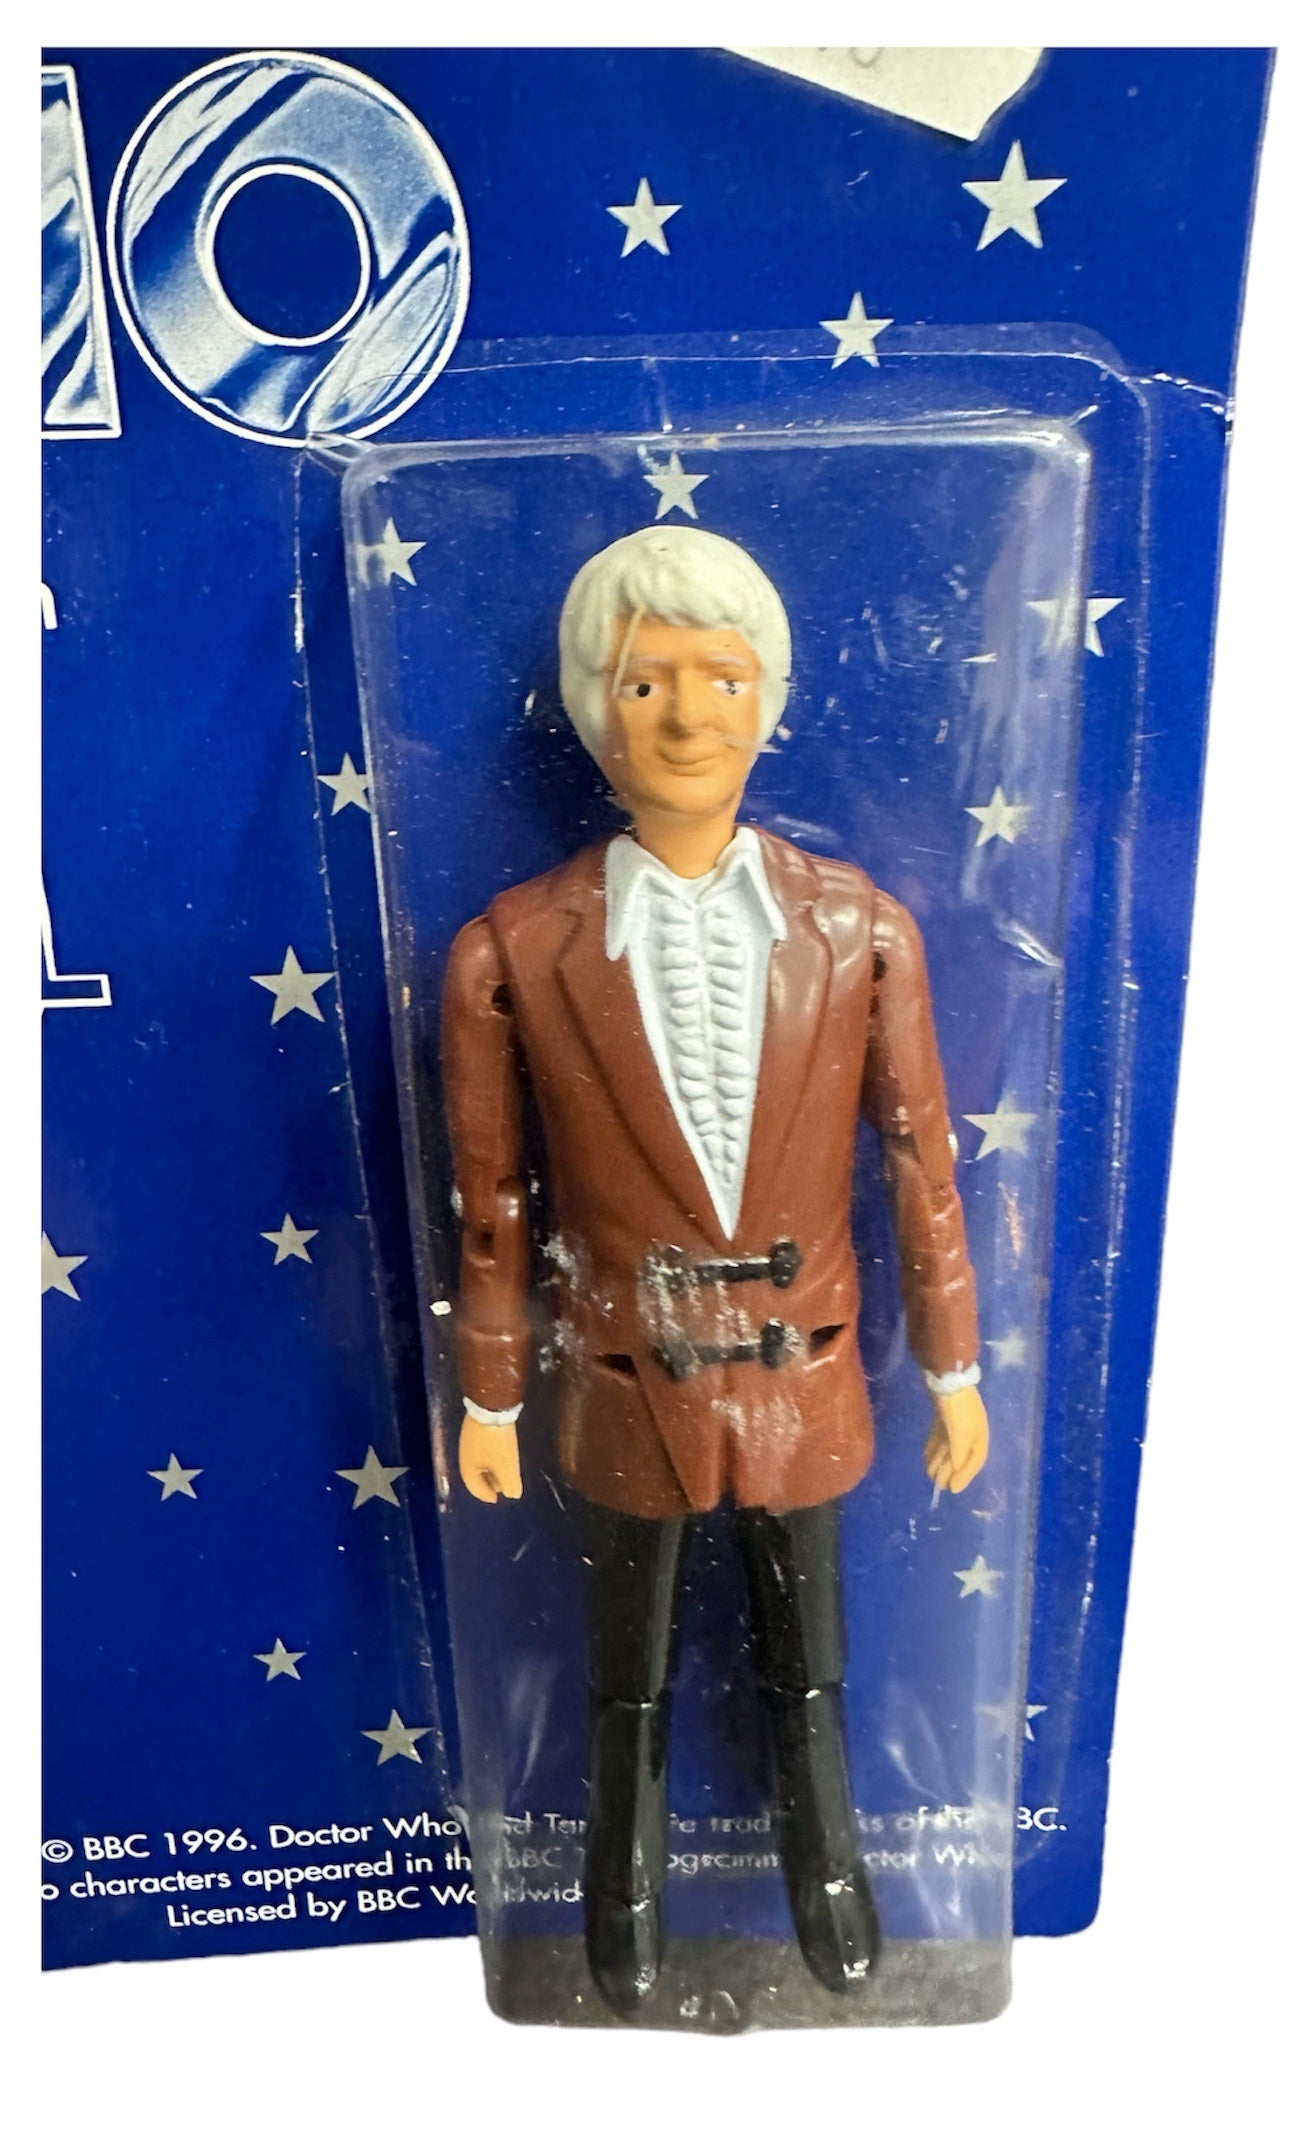 Vintage 1996 Dr Doctor Who Classic The 3rd Doctor Action Figure By Dapol - Mint On Card - Shop Stock Room Find